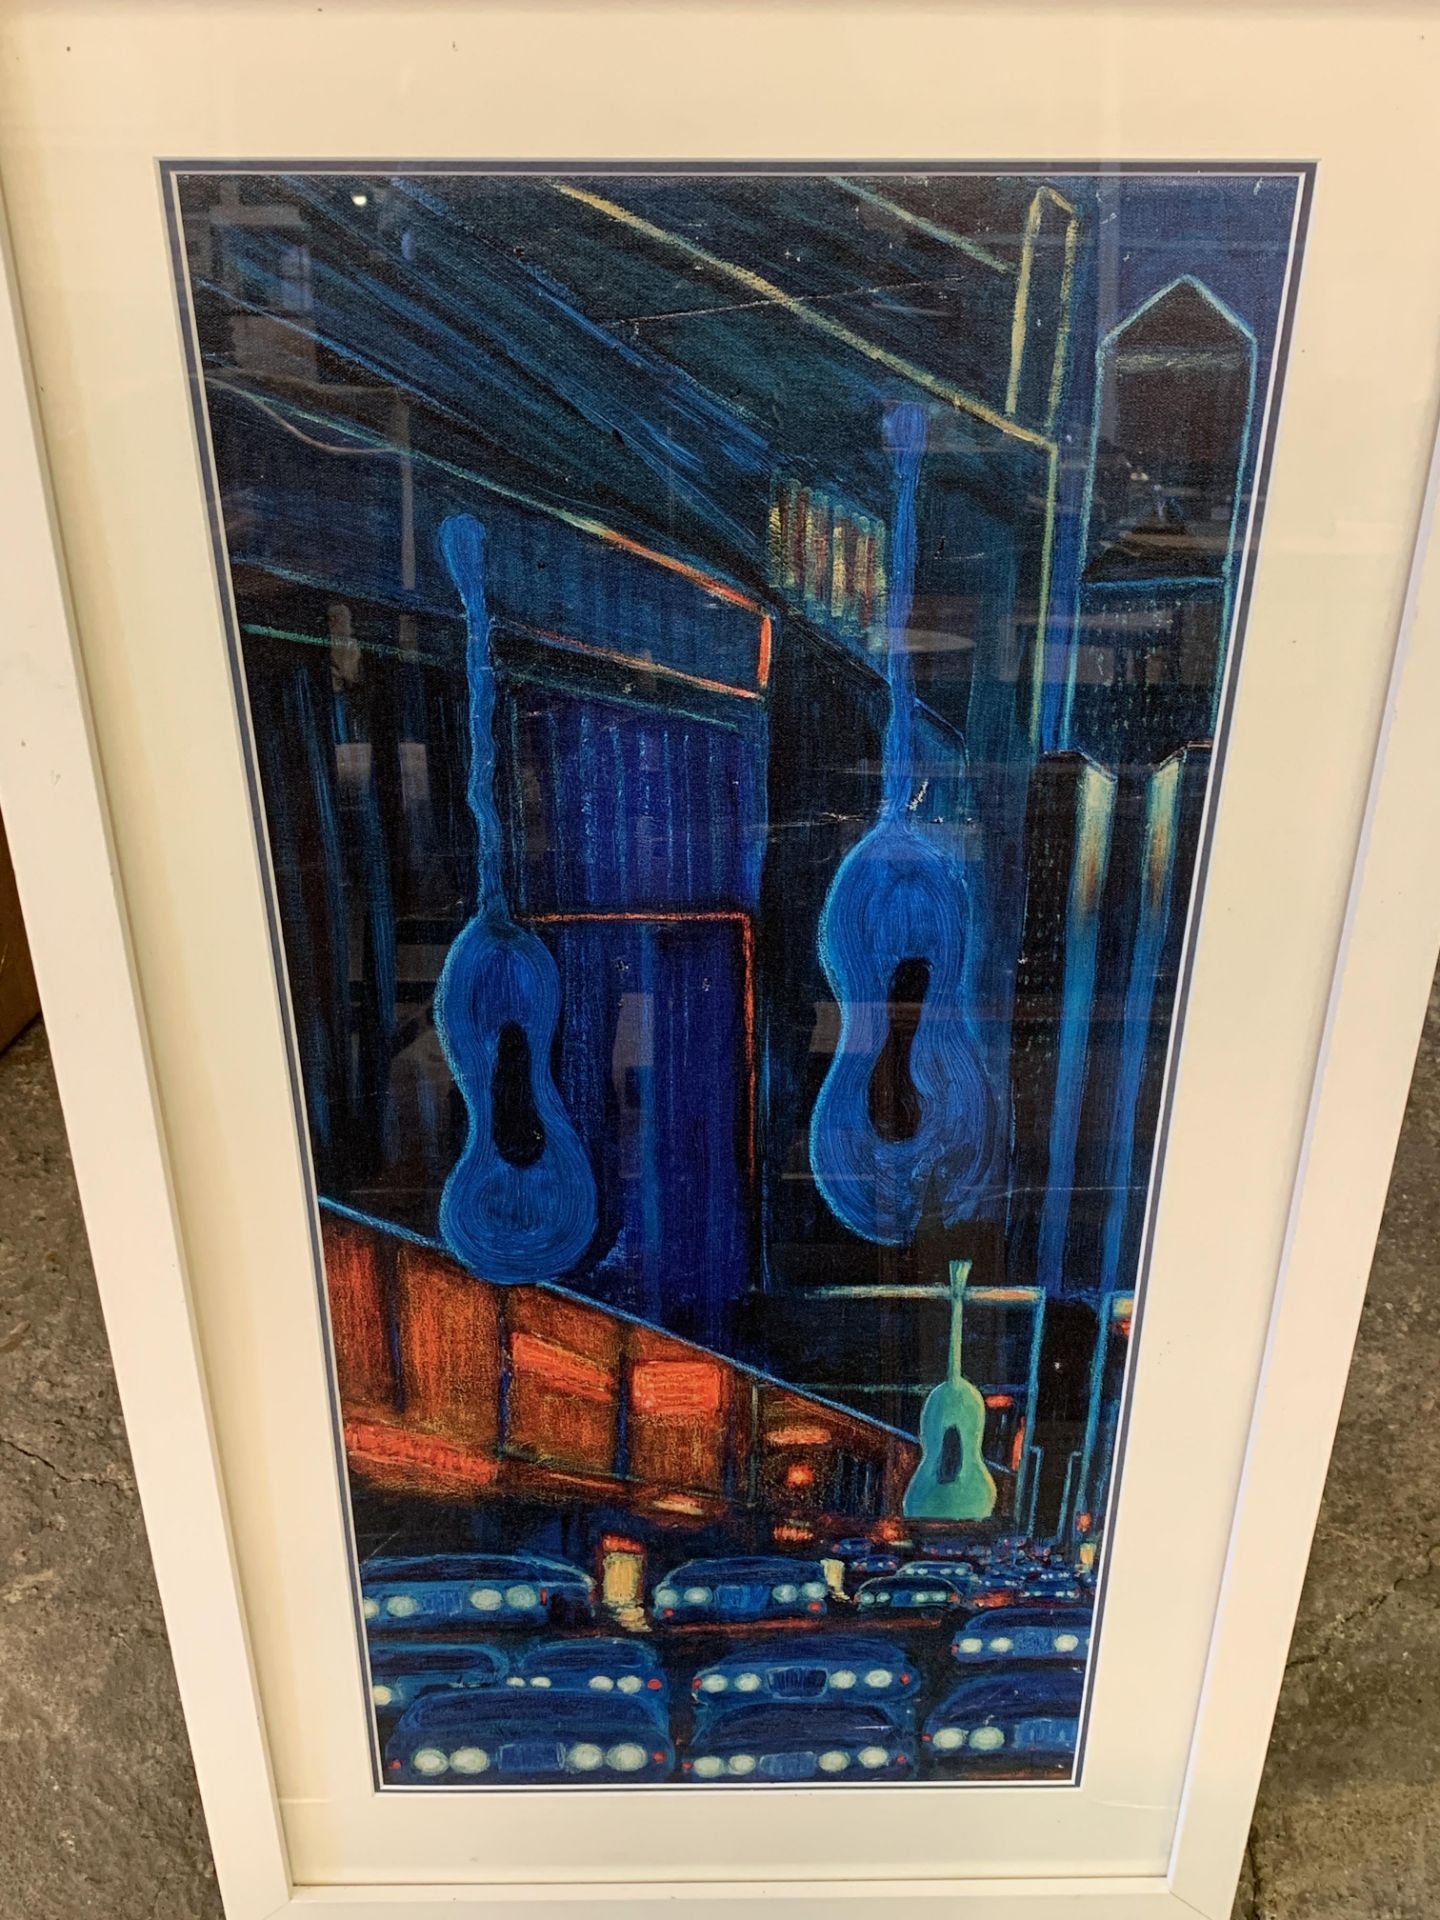 Framed and glazed acrylic on board "New York, New York" - Image 2 of 4